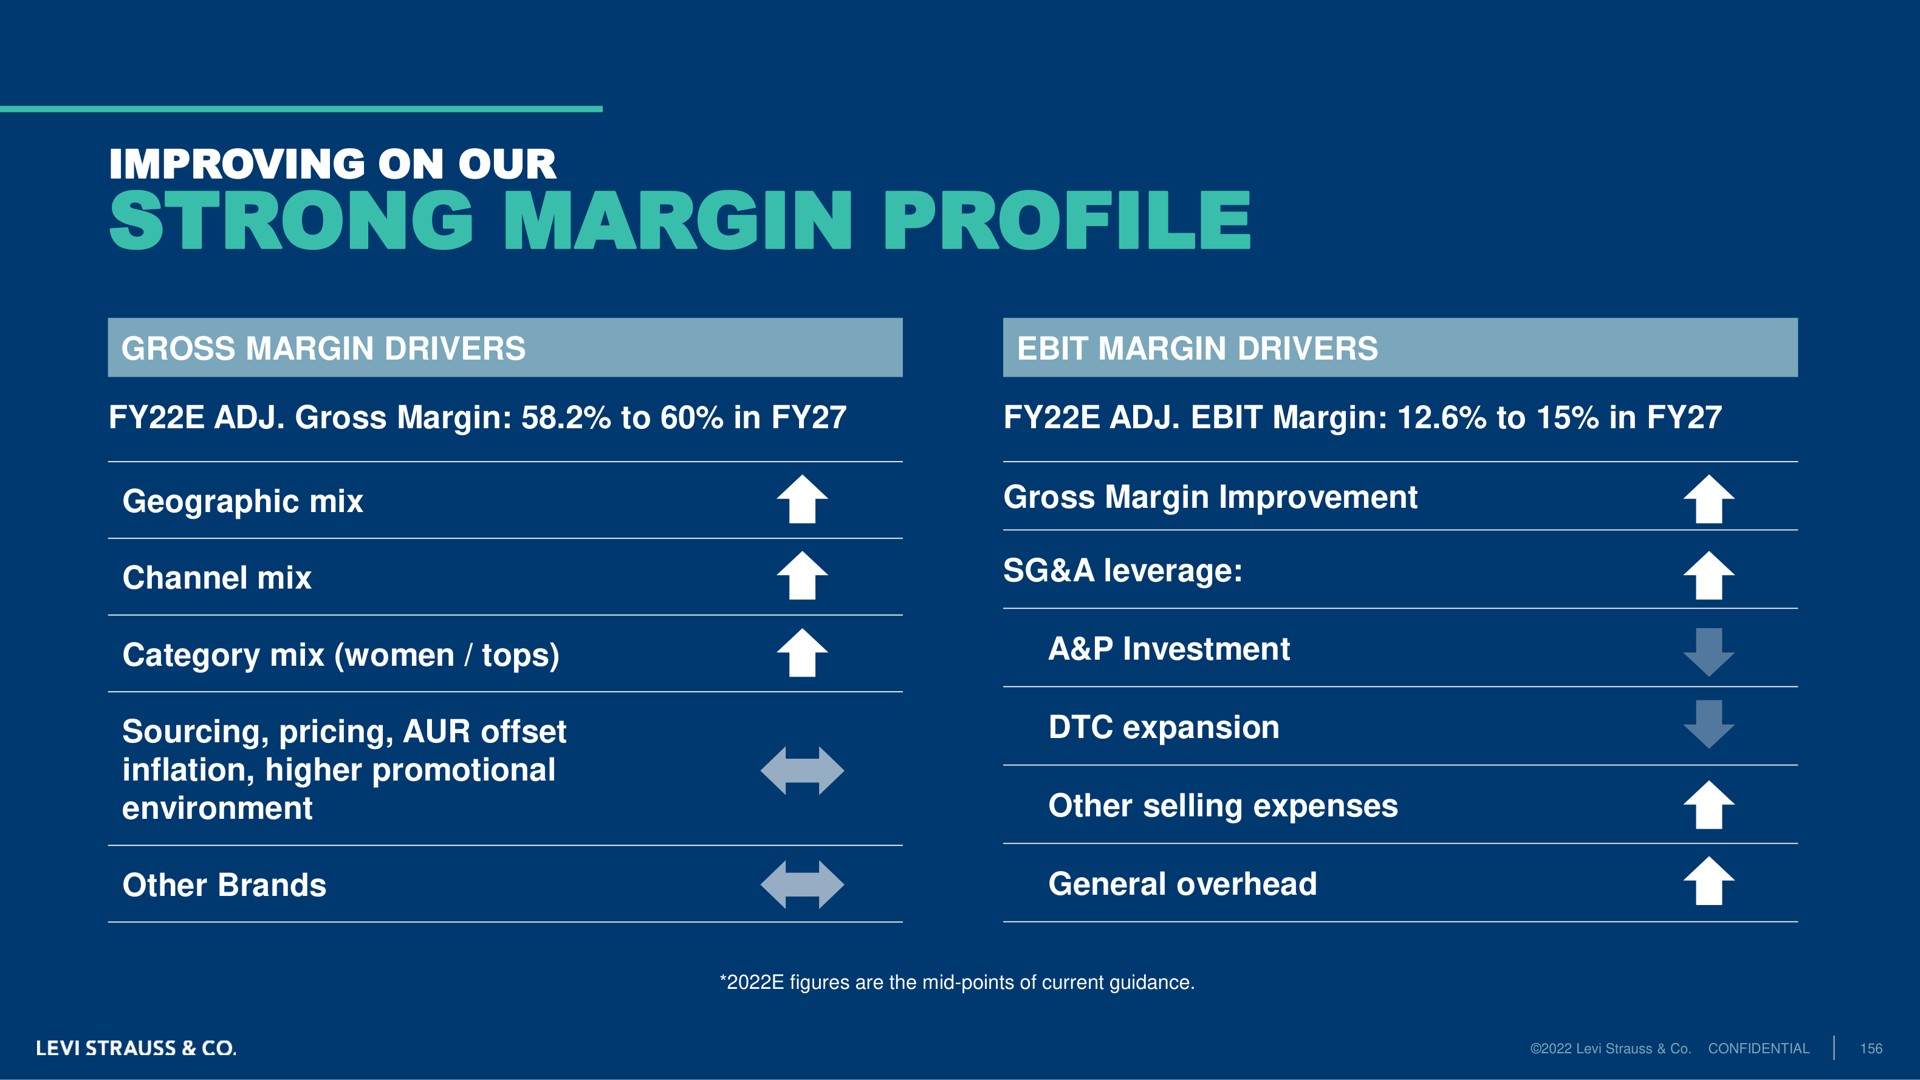 improving on our strong margin profile a gross to in to in geographic mix channel mix category mix women tops sourcing pricing offset inflation higher promotional a gross improvement a leverage ura expansion other selling expenses general overhead | Levi Strauss